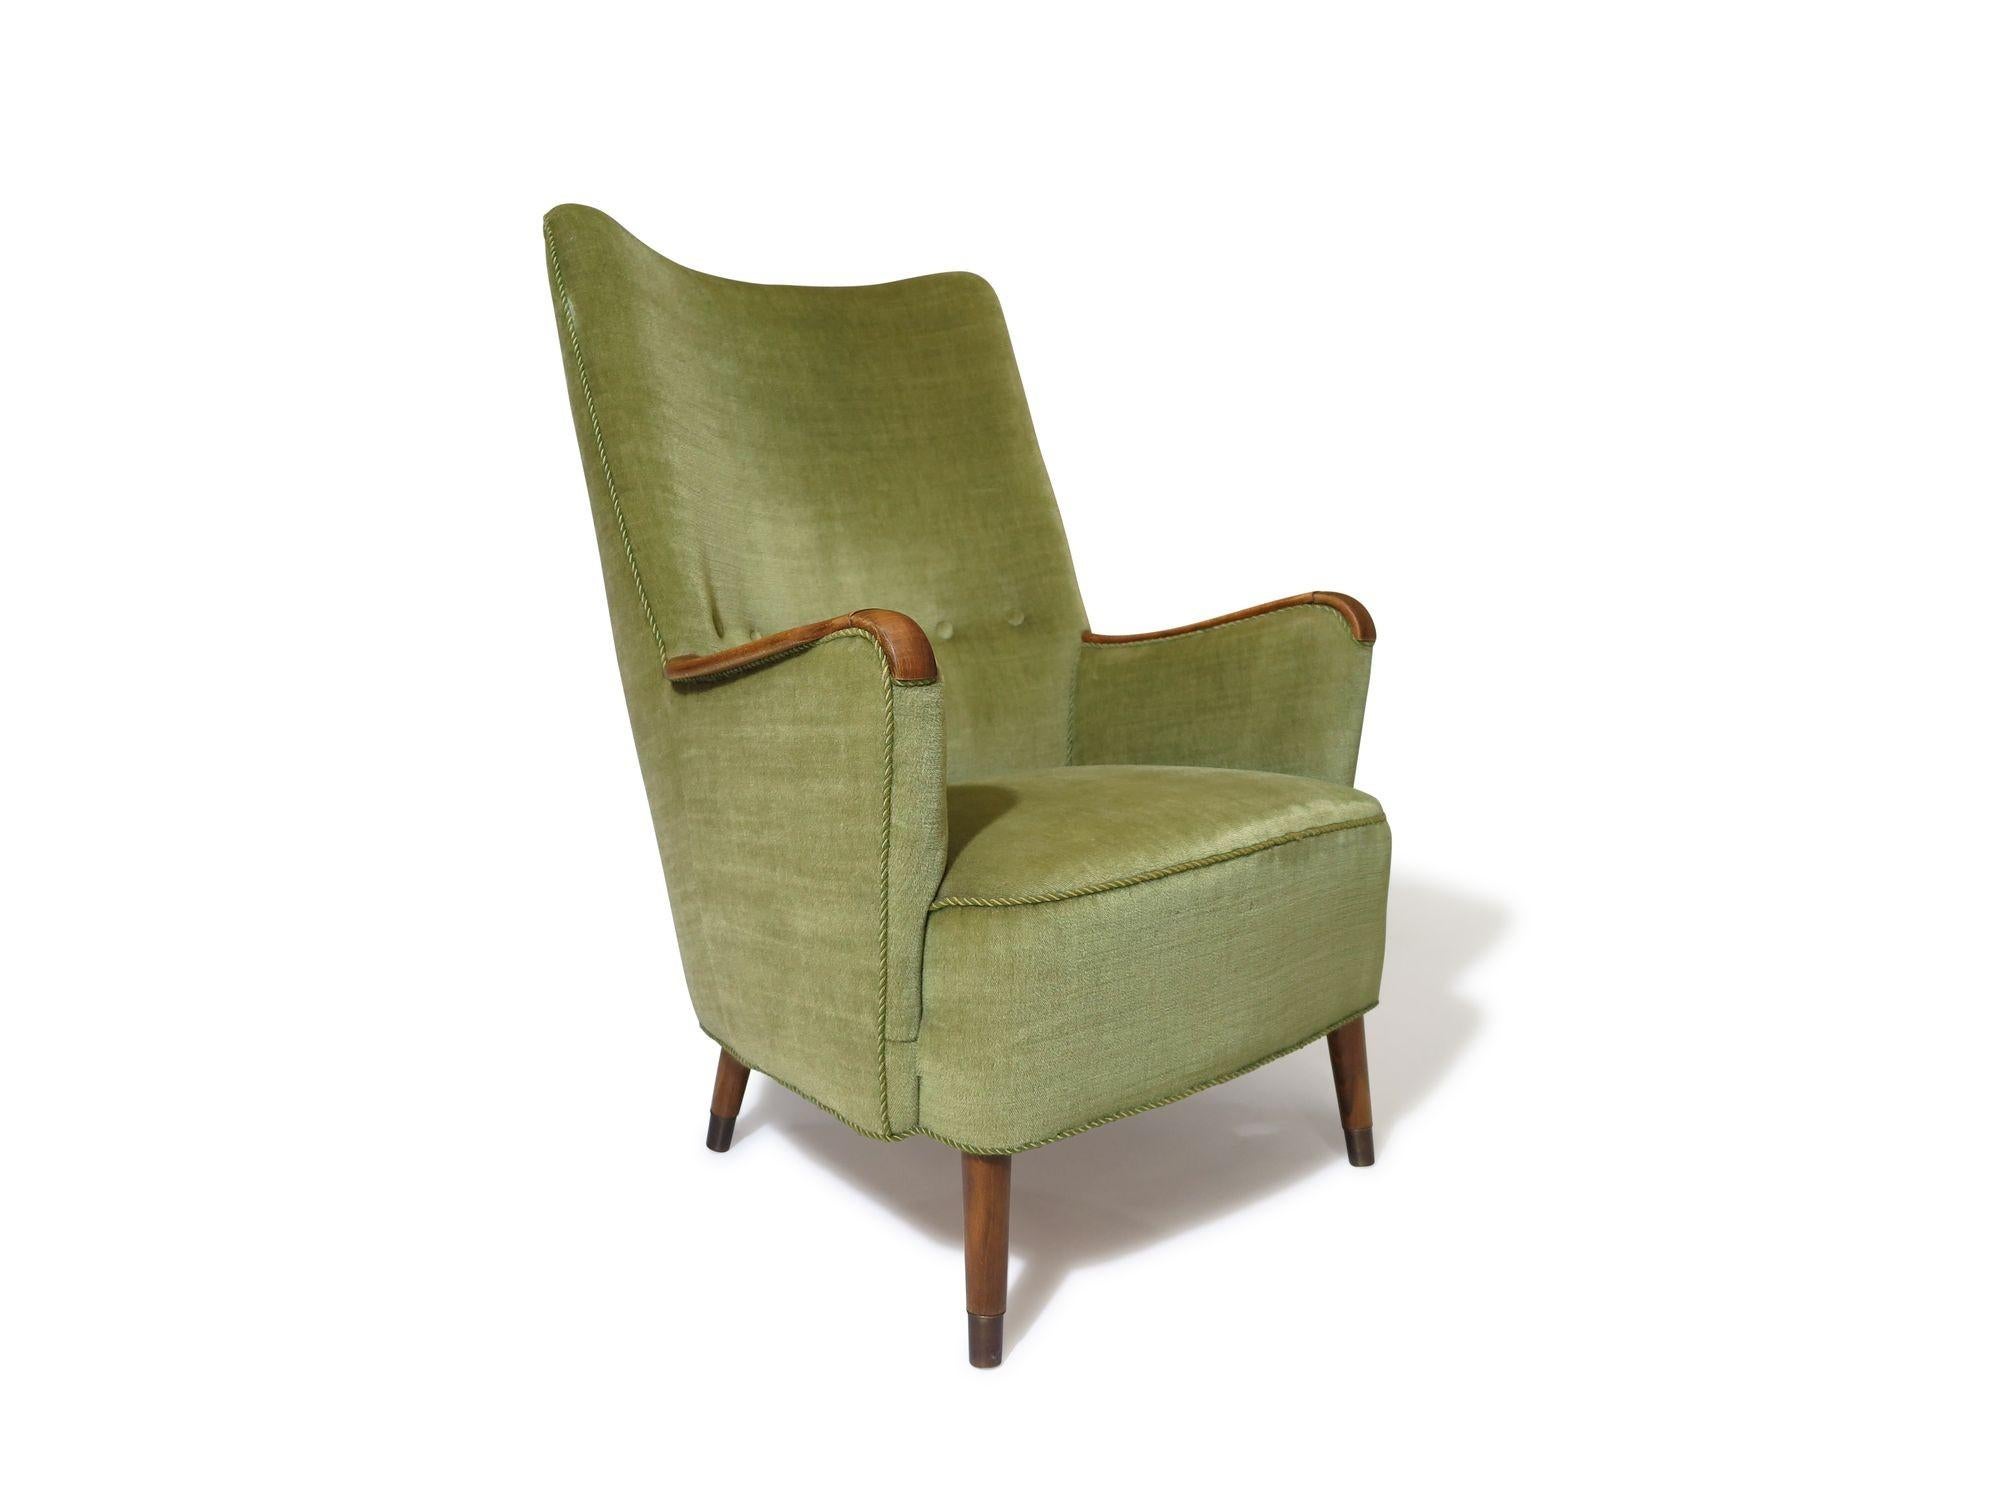 1960s Danish high-back lounge chair crafted a solid wood frame with hand-tied spring seat, upholstered in its original green mohair fabric. The button tufted back and wooden armrest add to its charm, providing excellent back support and comfortable